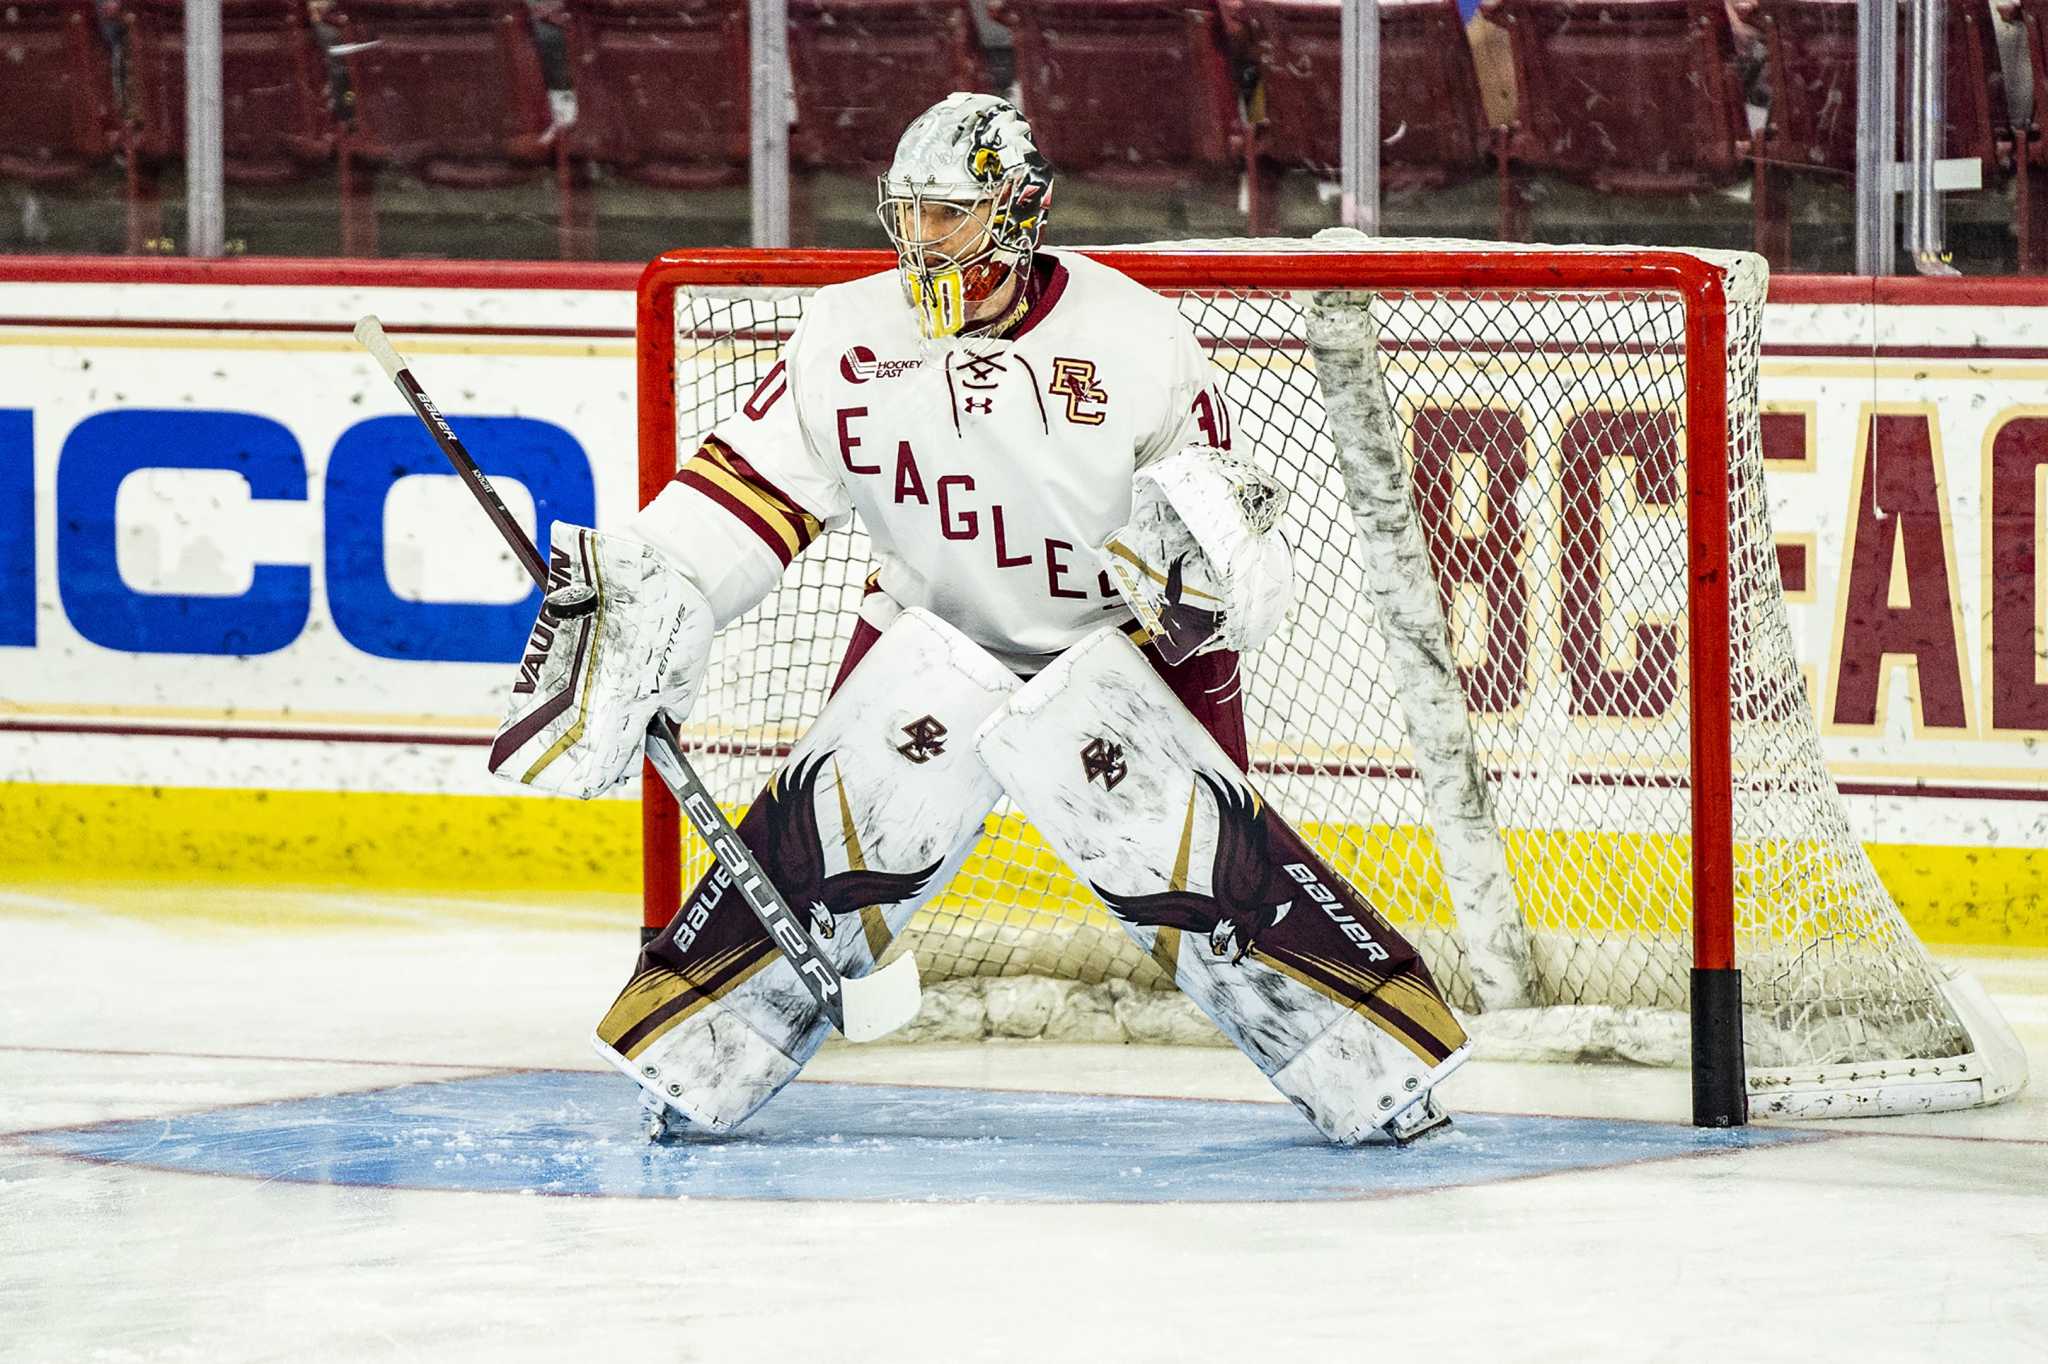 Boston College 3 Colgate 0: Spencer Knight Shines In First Career